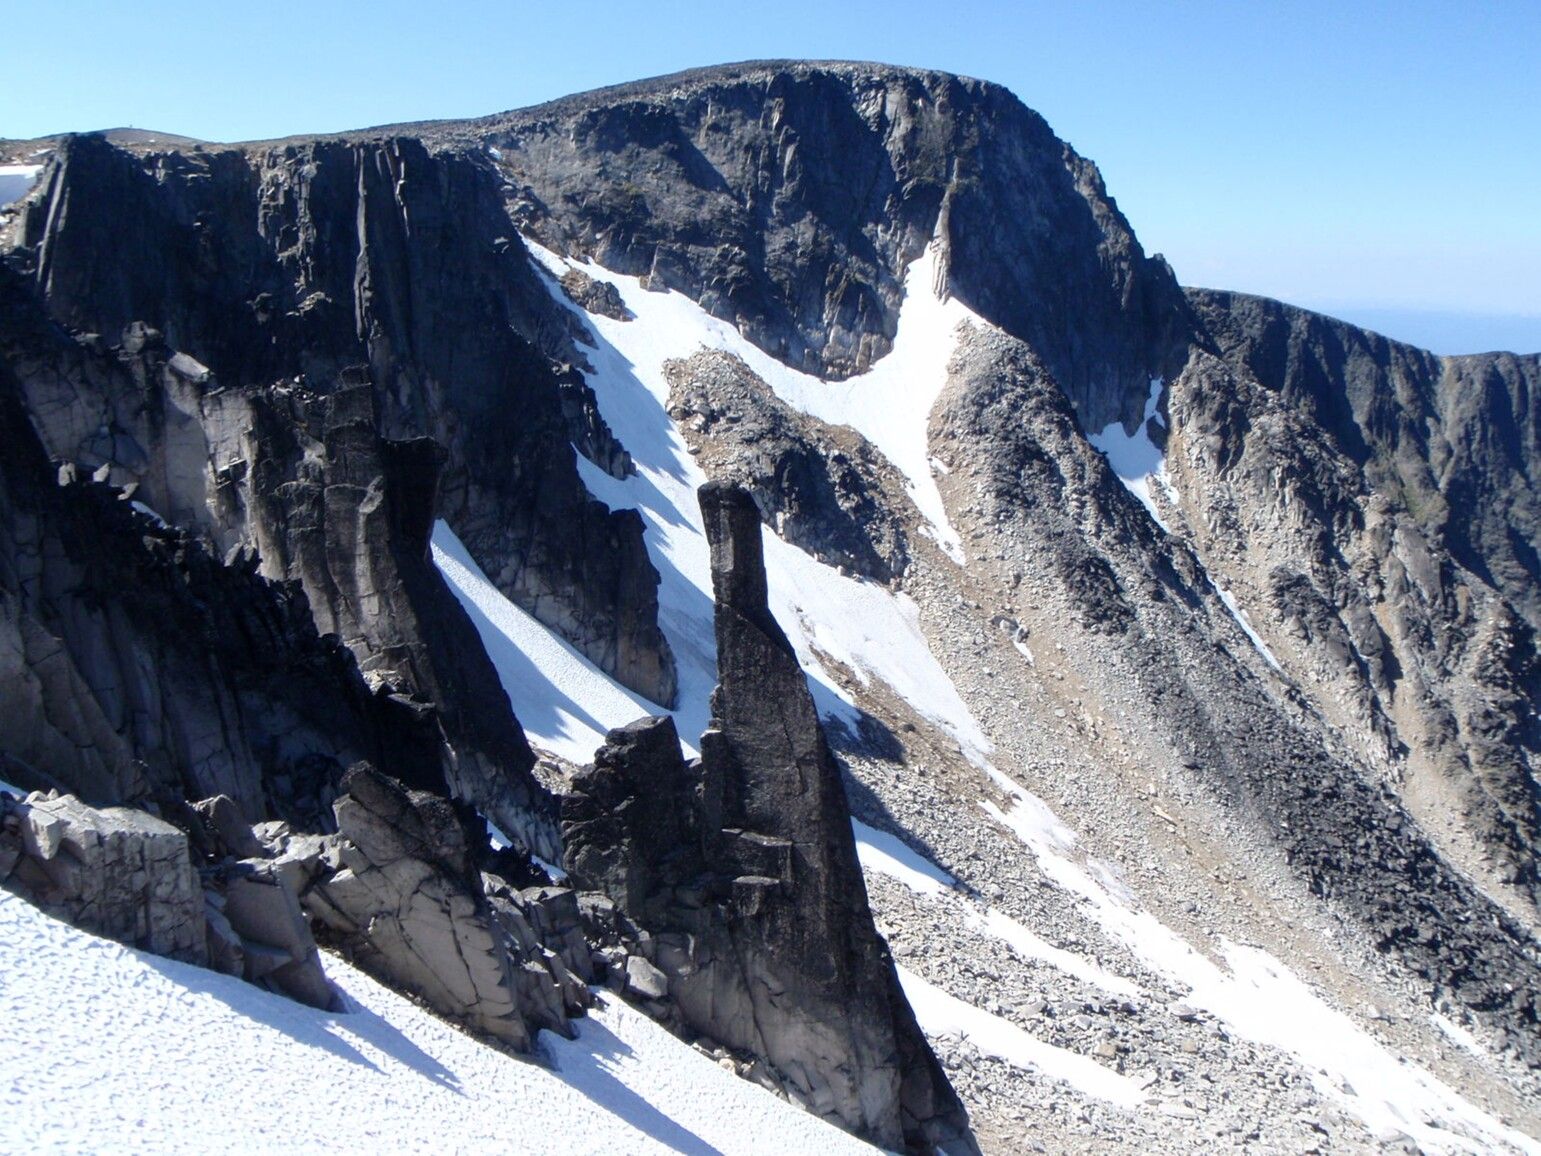 Nadina Mountain alpine cirque with the Berkey-Howe Union Spire in the foreground.